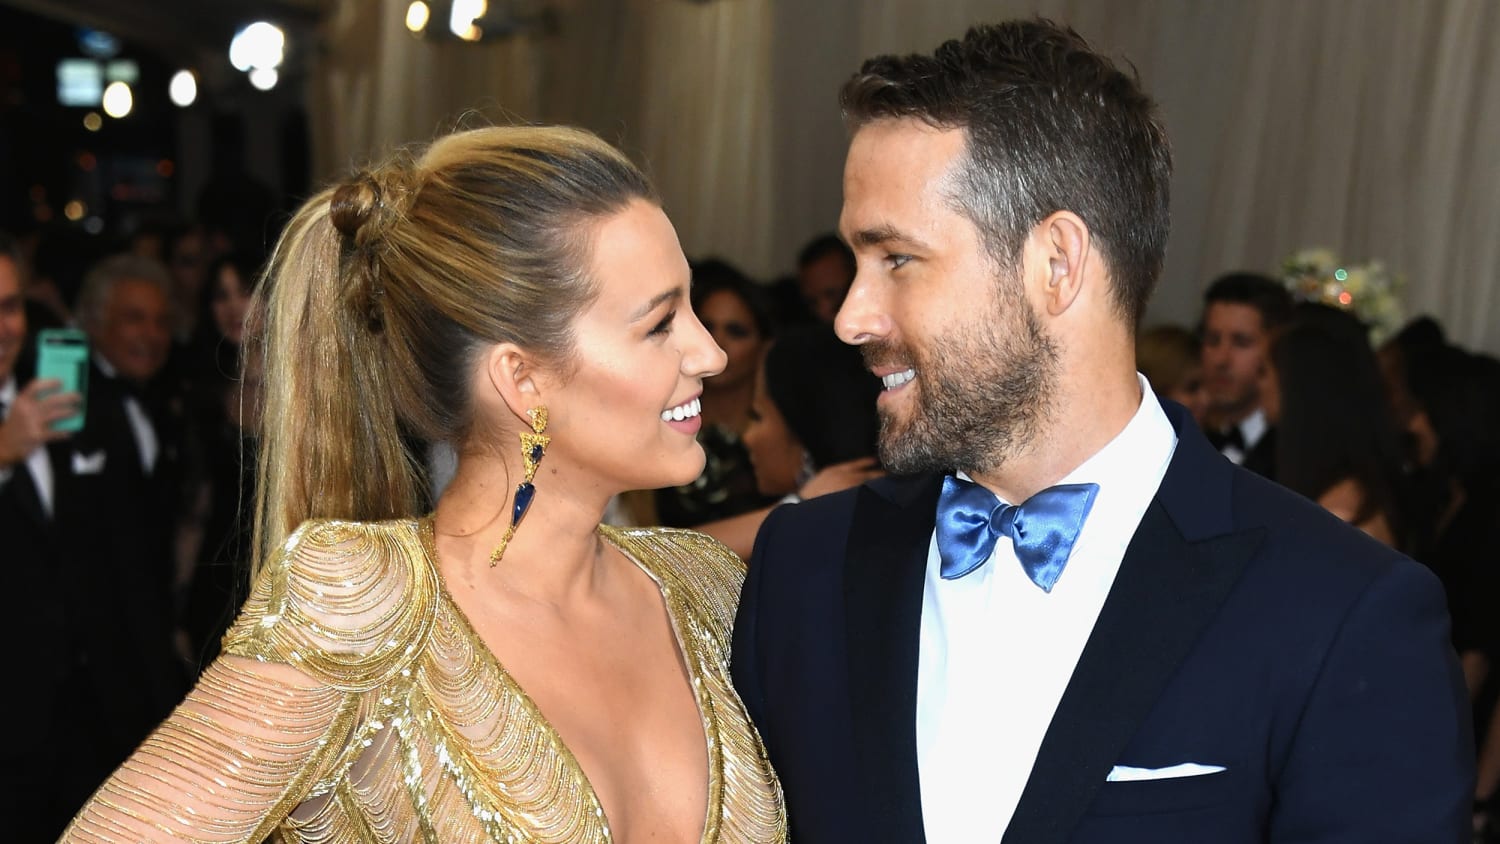 Ryan Reynolds raves about wife Blake Lively in sweet message - TODAY.com